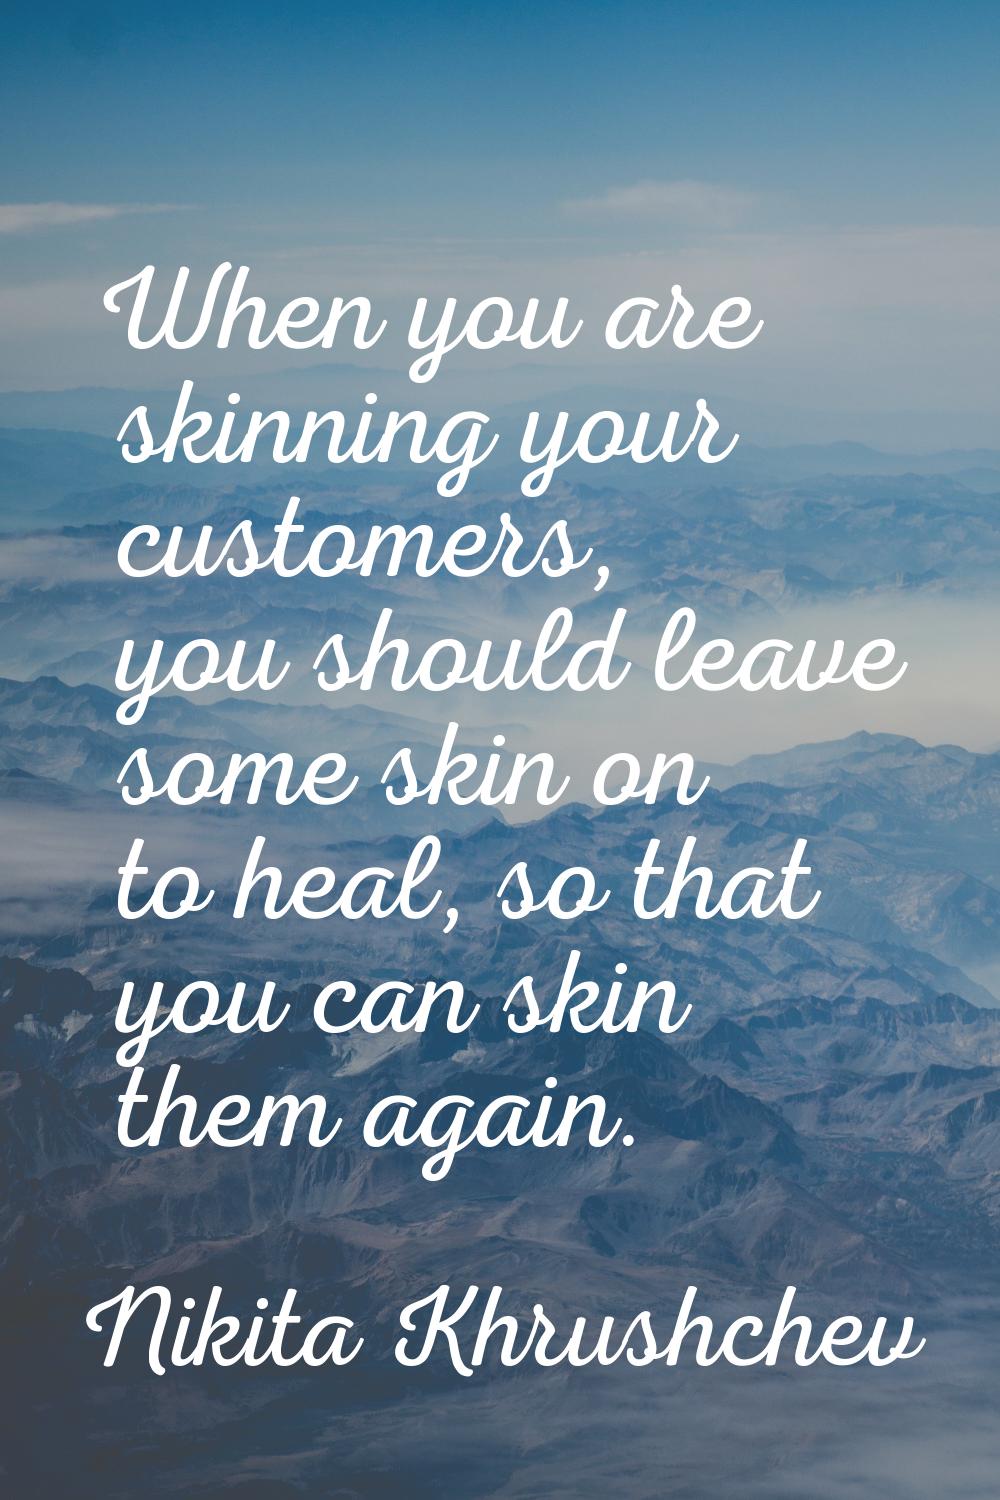 When you are skinning your customers, you should leave some skin on to heal, so that you can skin t